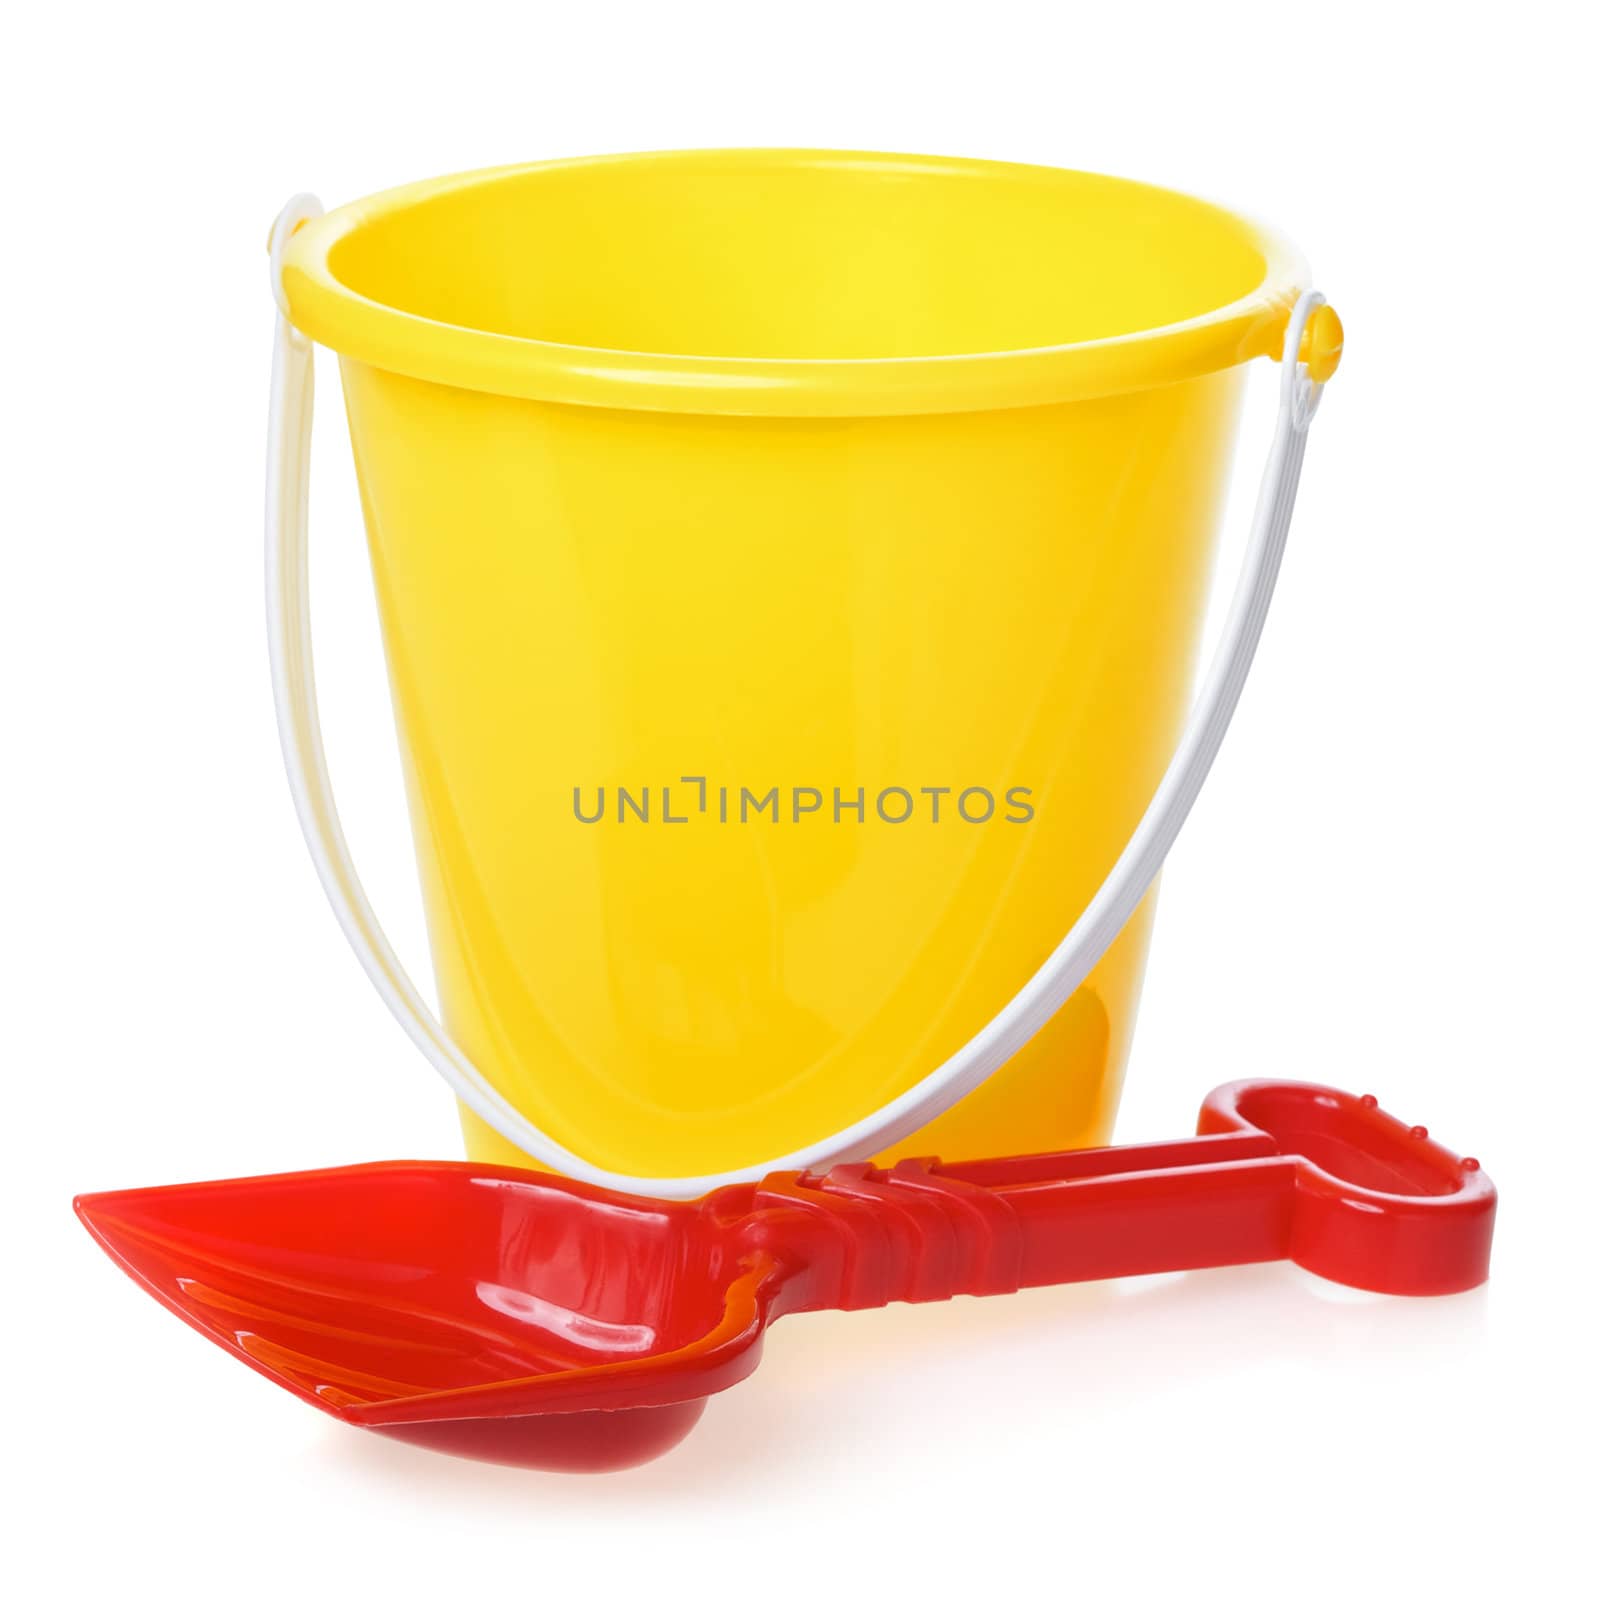 Toy Bucket And Scoop by petr_malyshev